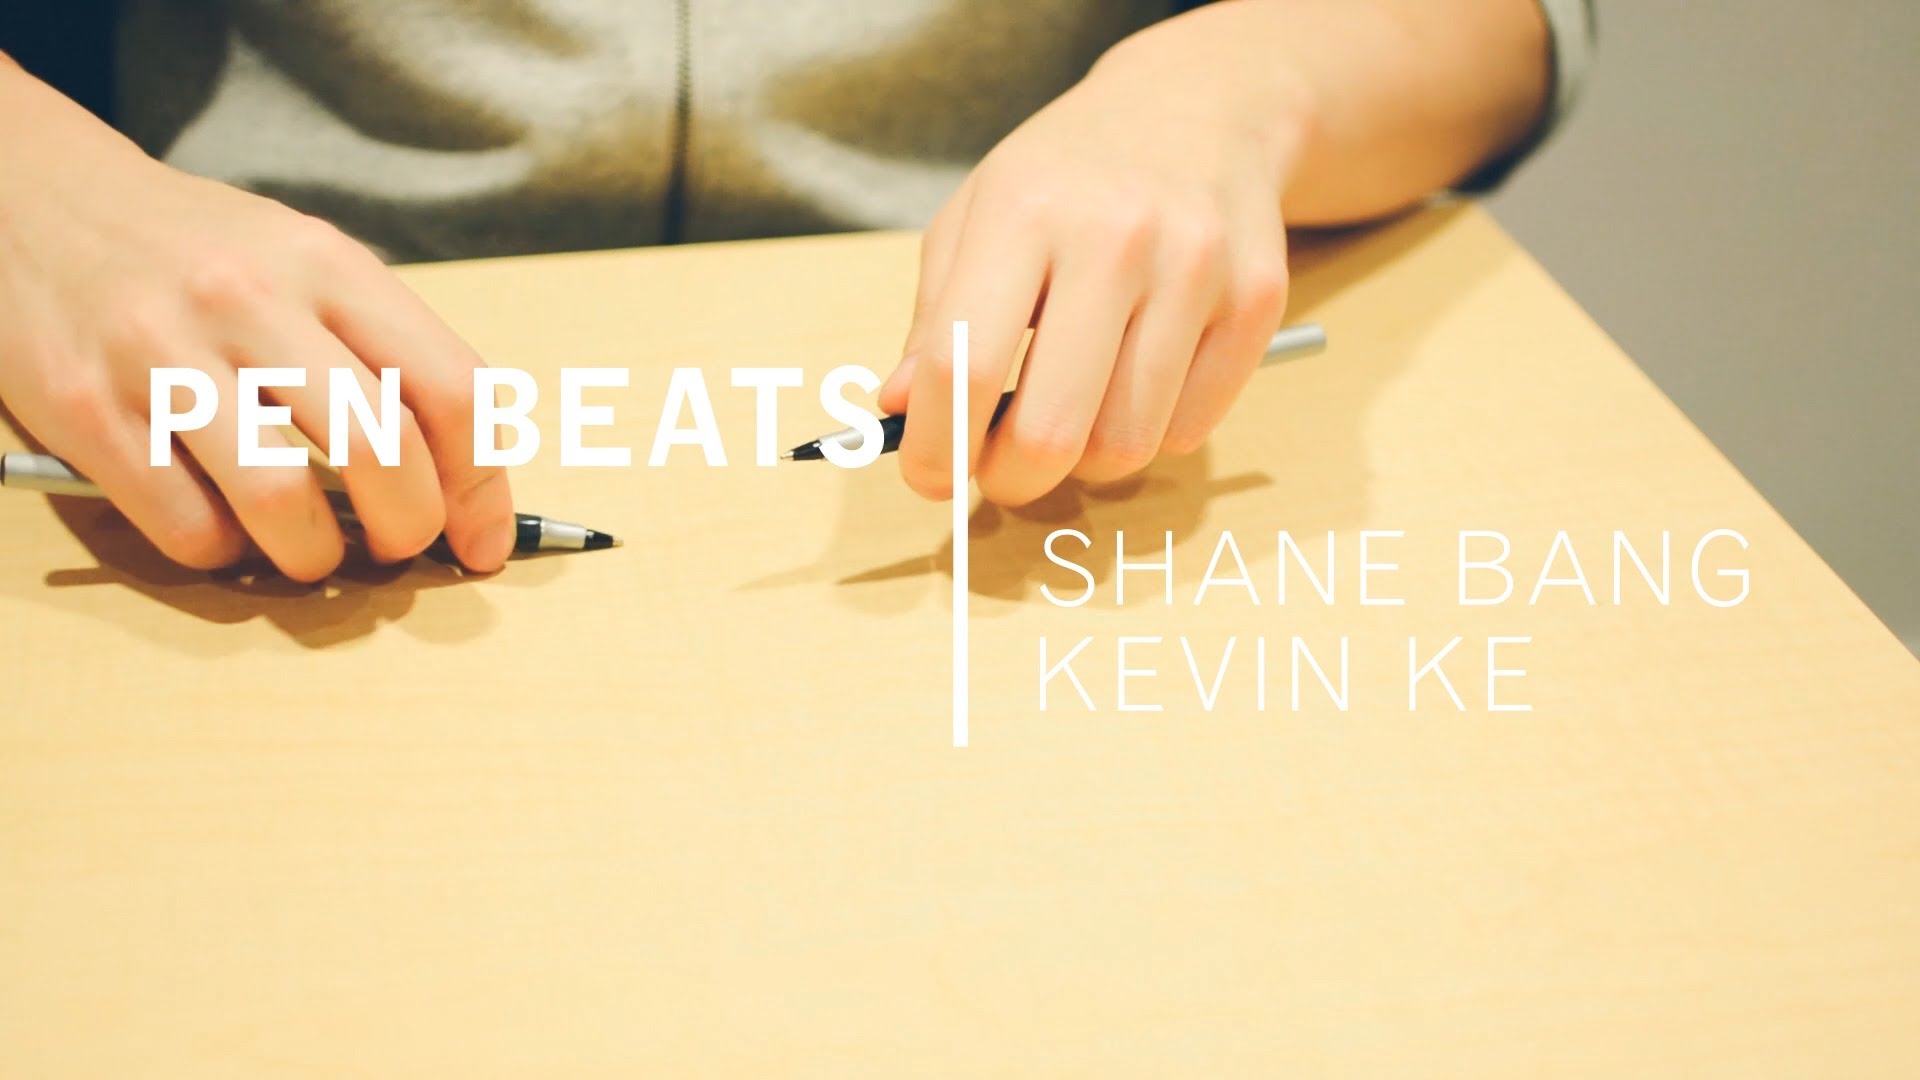 Impressive !! Pen beats by Shane and Kevin